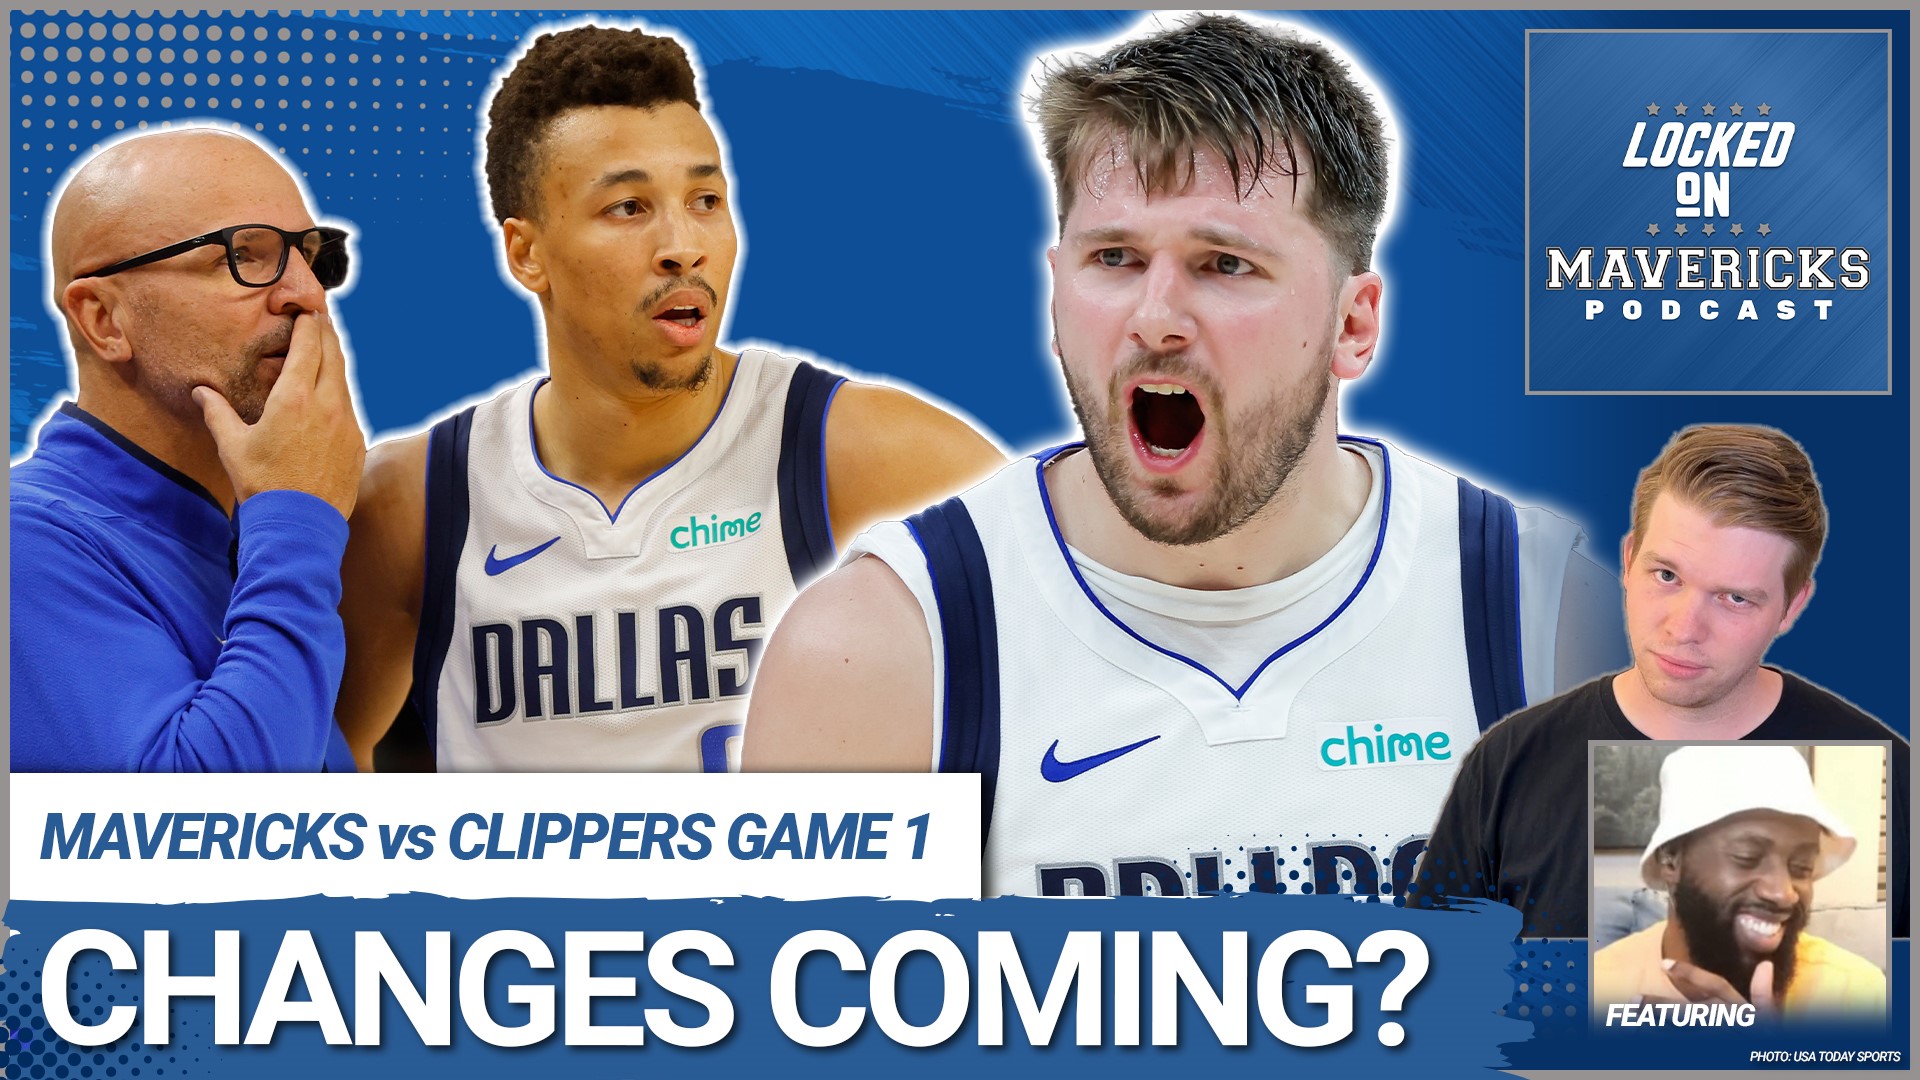 Nick Angstadt  & Reggie Adetula discuss how the Dallas Mavericks vs Los Angeles Clippers Game 1 was different than expected and share some changes for Game 2.